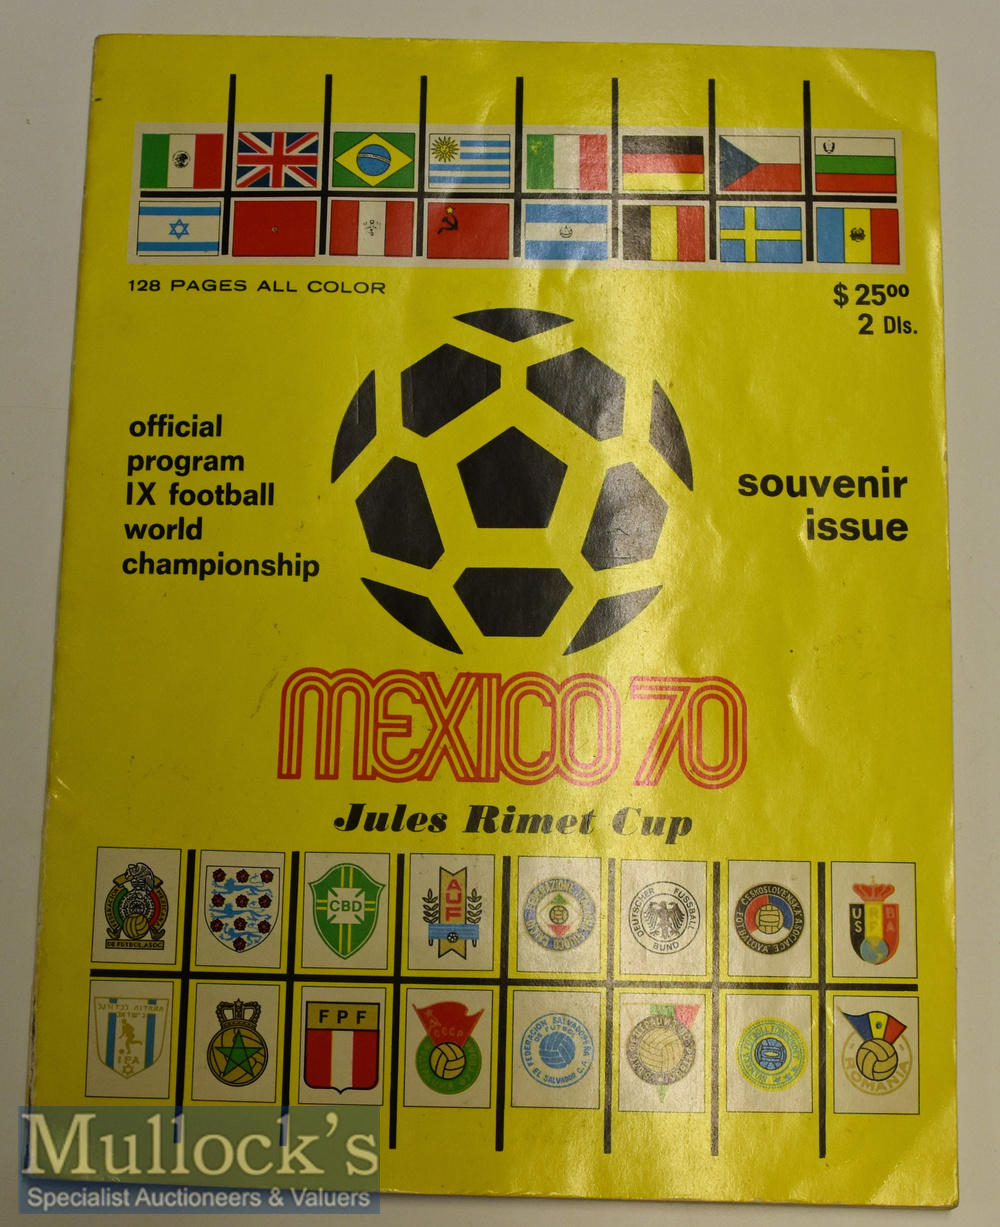 1970 Mexico World Cup Official Football Programme 128 page souvenir issue^ yellow version.